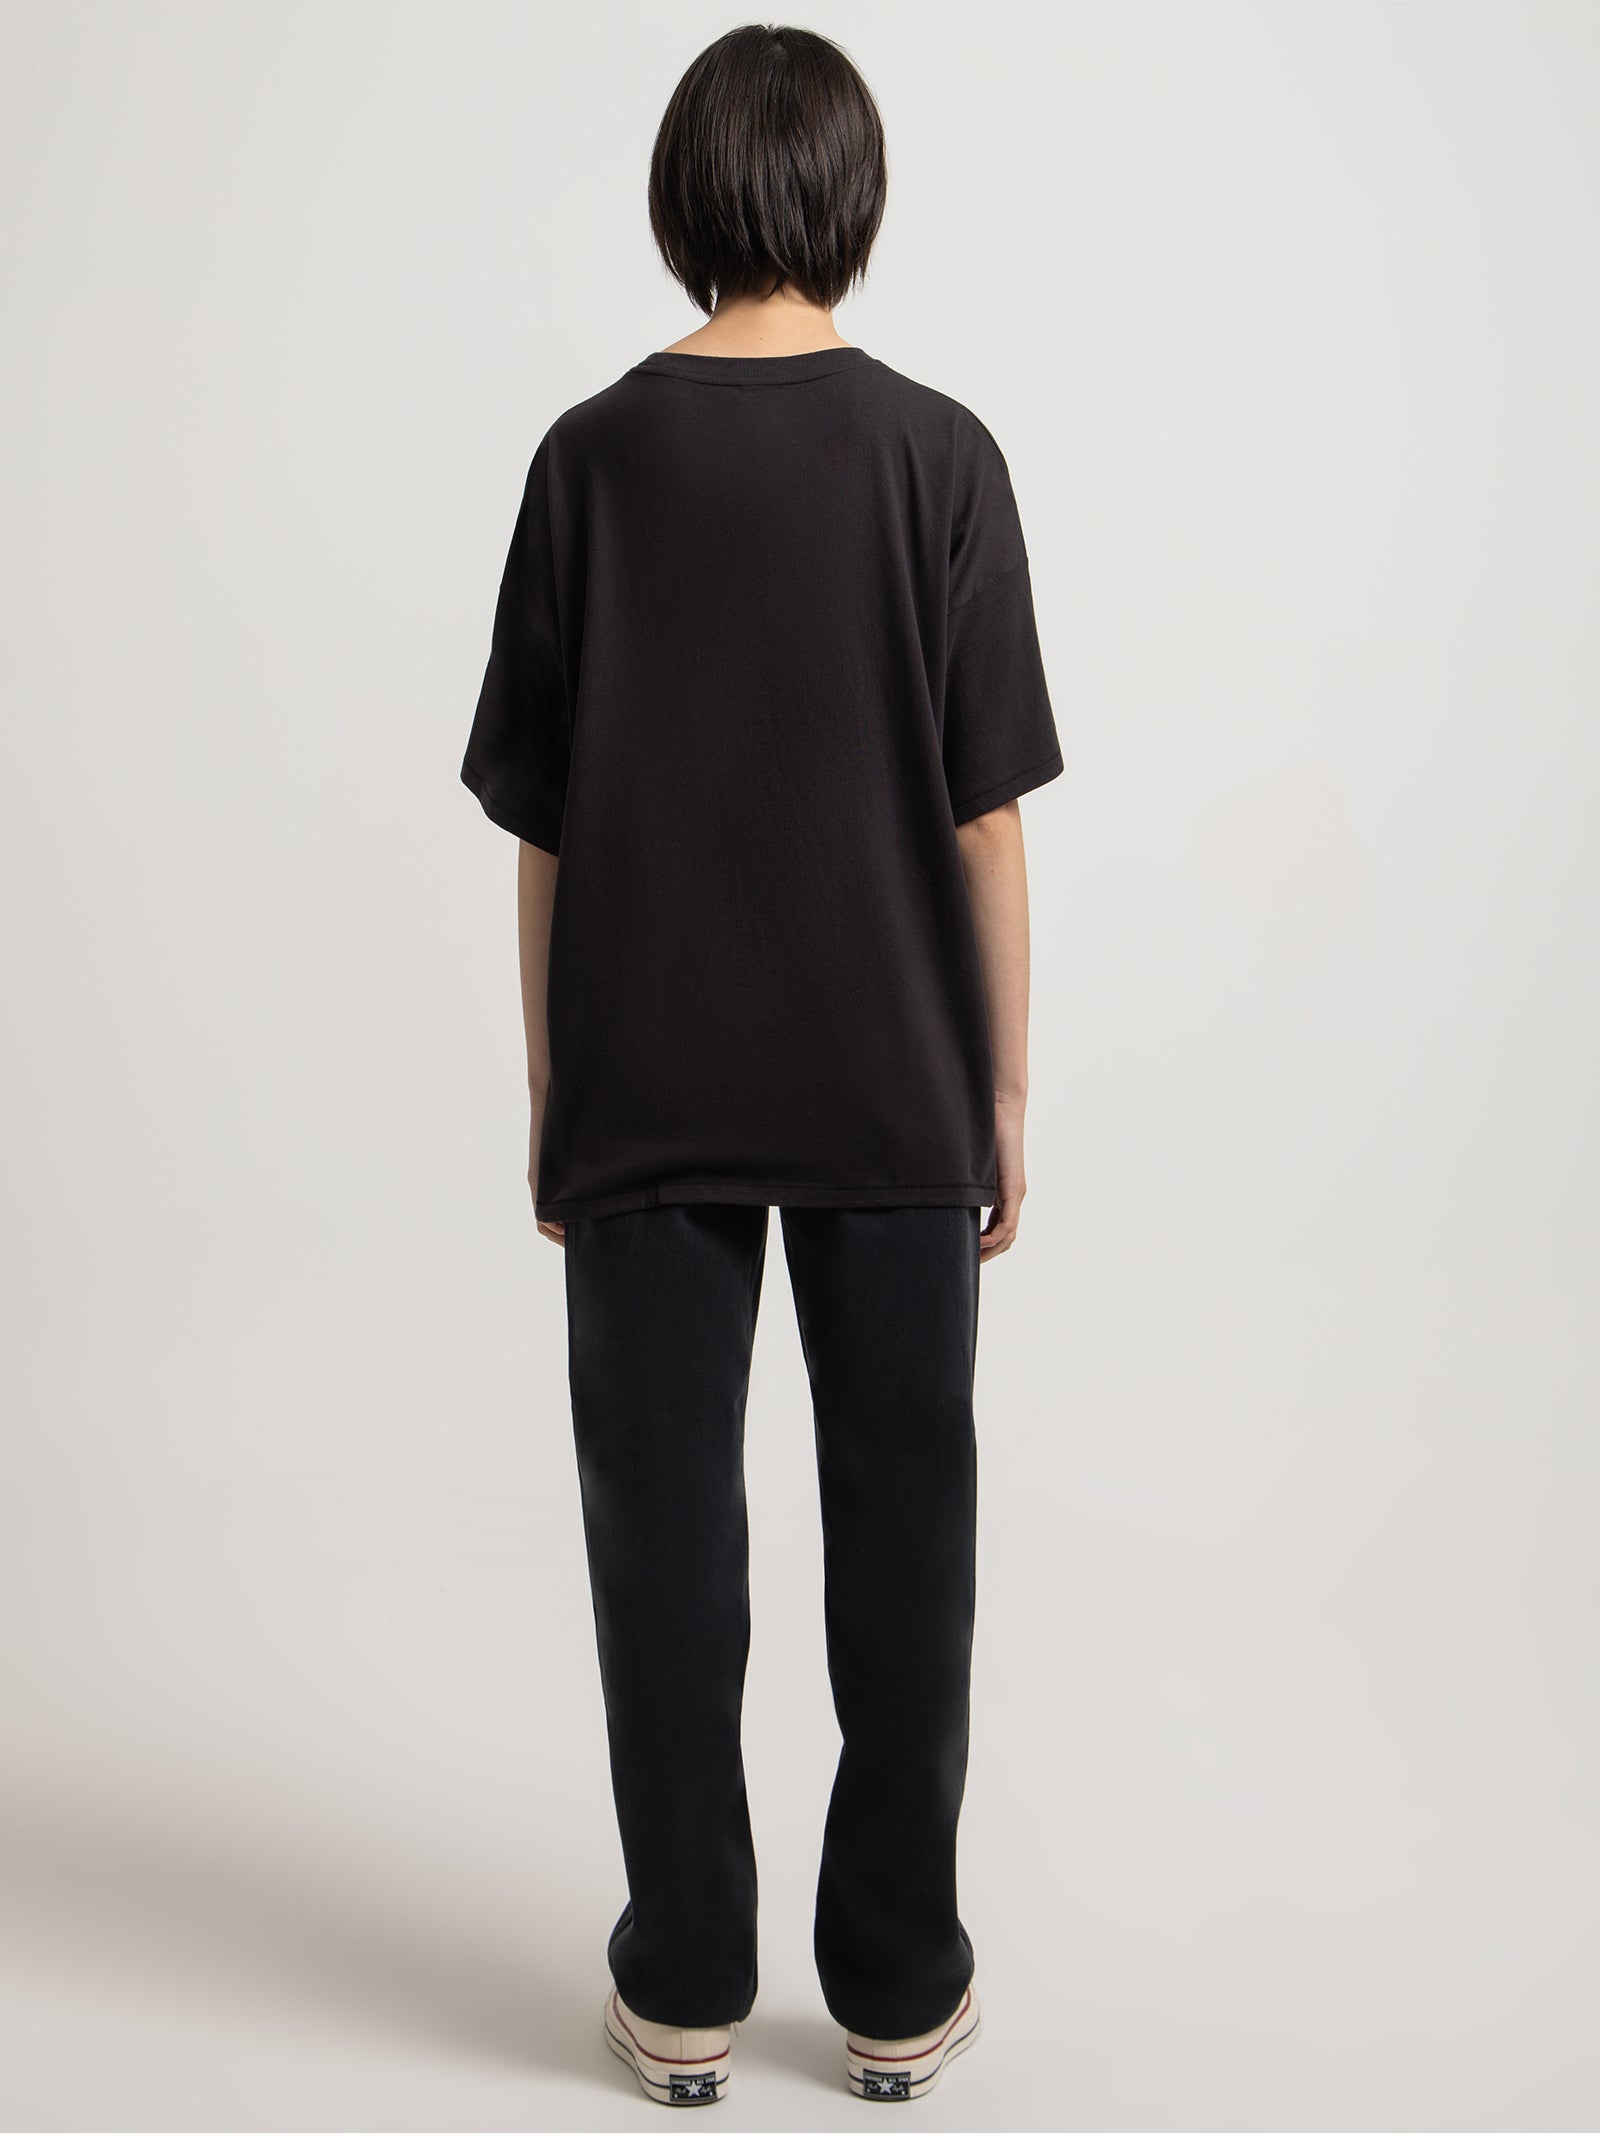 Boxy Slouch T-Shirt in Black & Multi - Glue Store